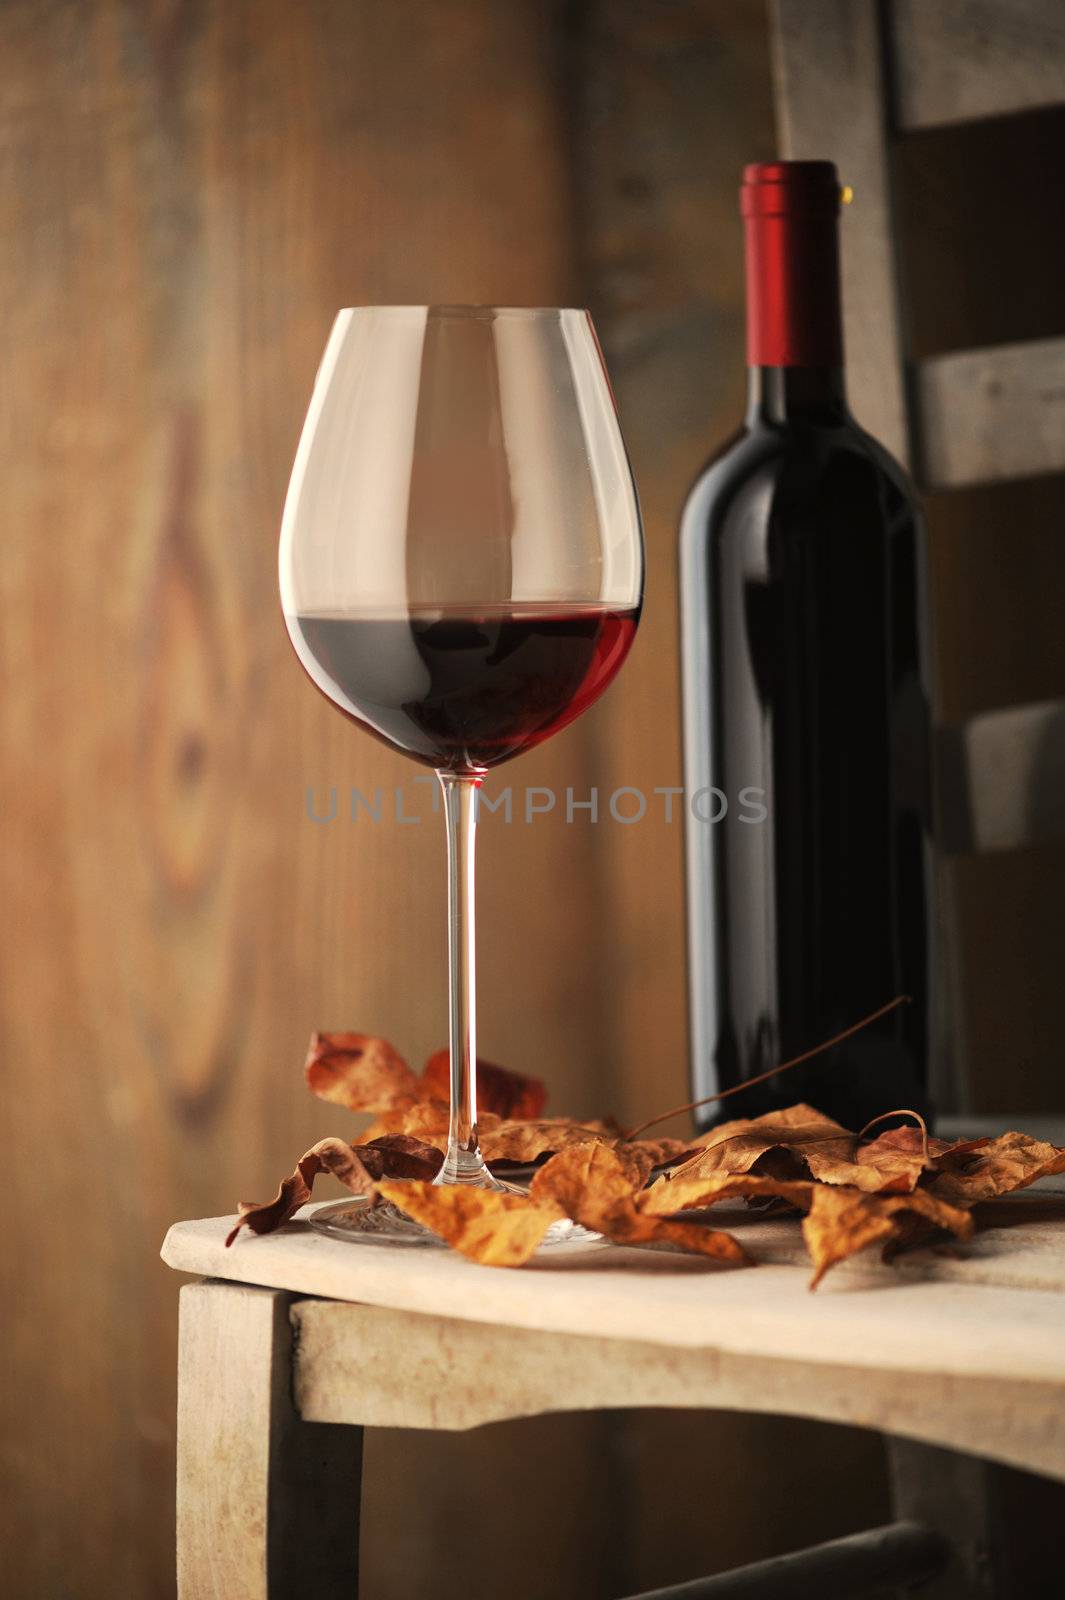  glass of red wine on a wooden chair, with dry leaves and a bottle of red wine on background